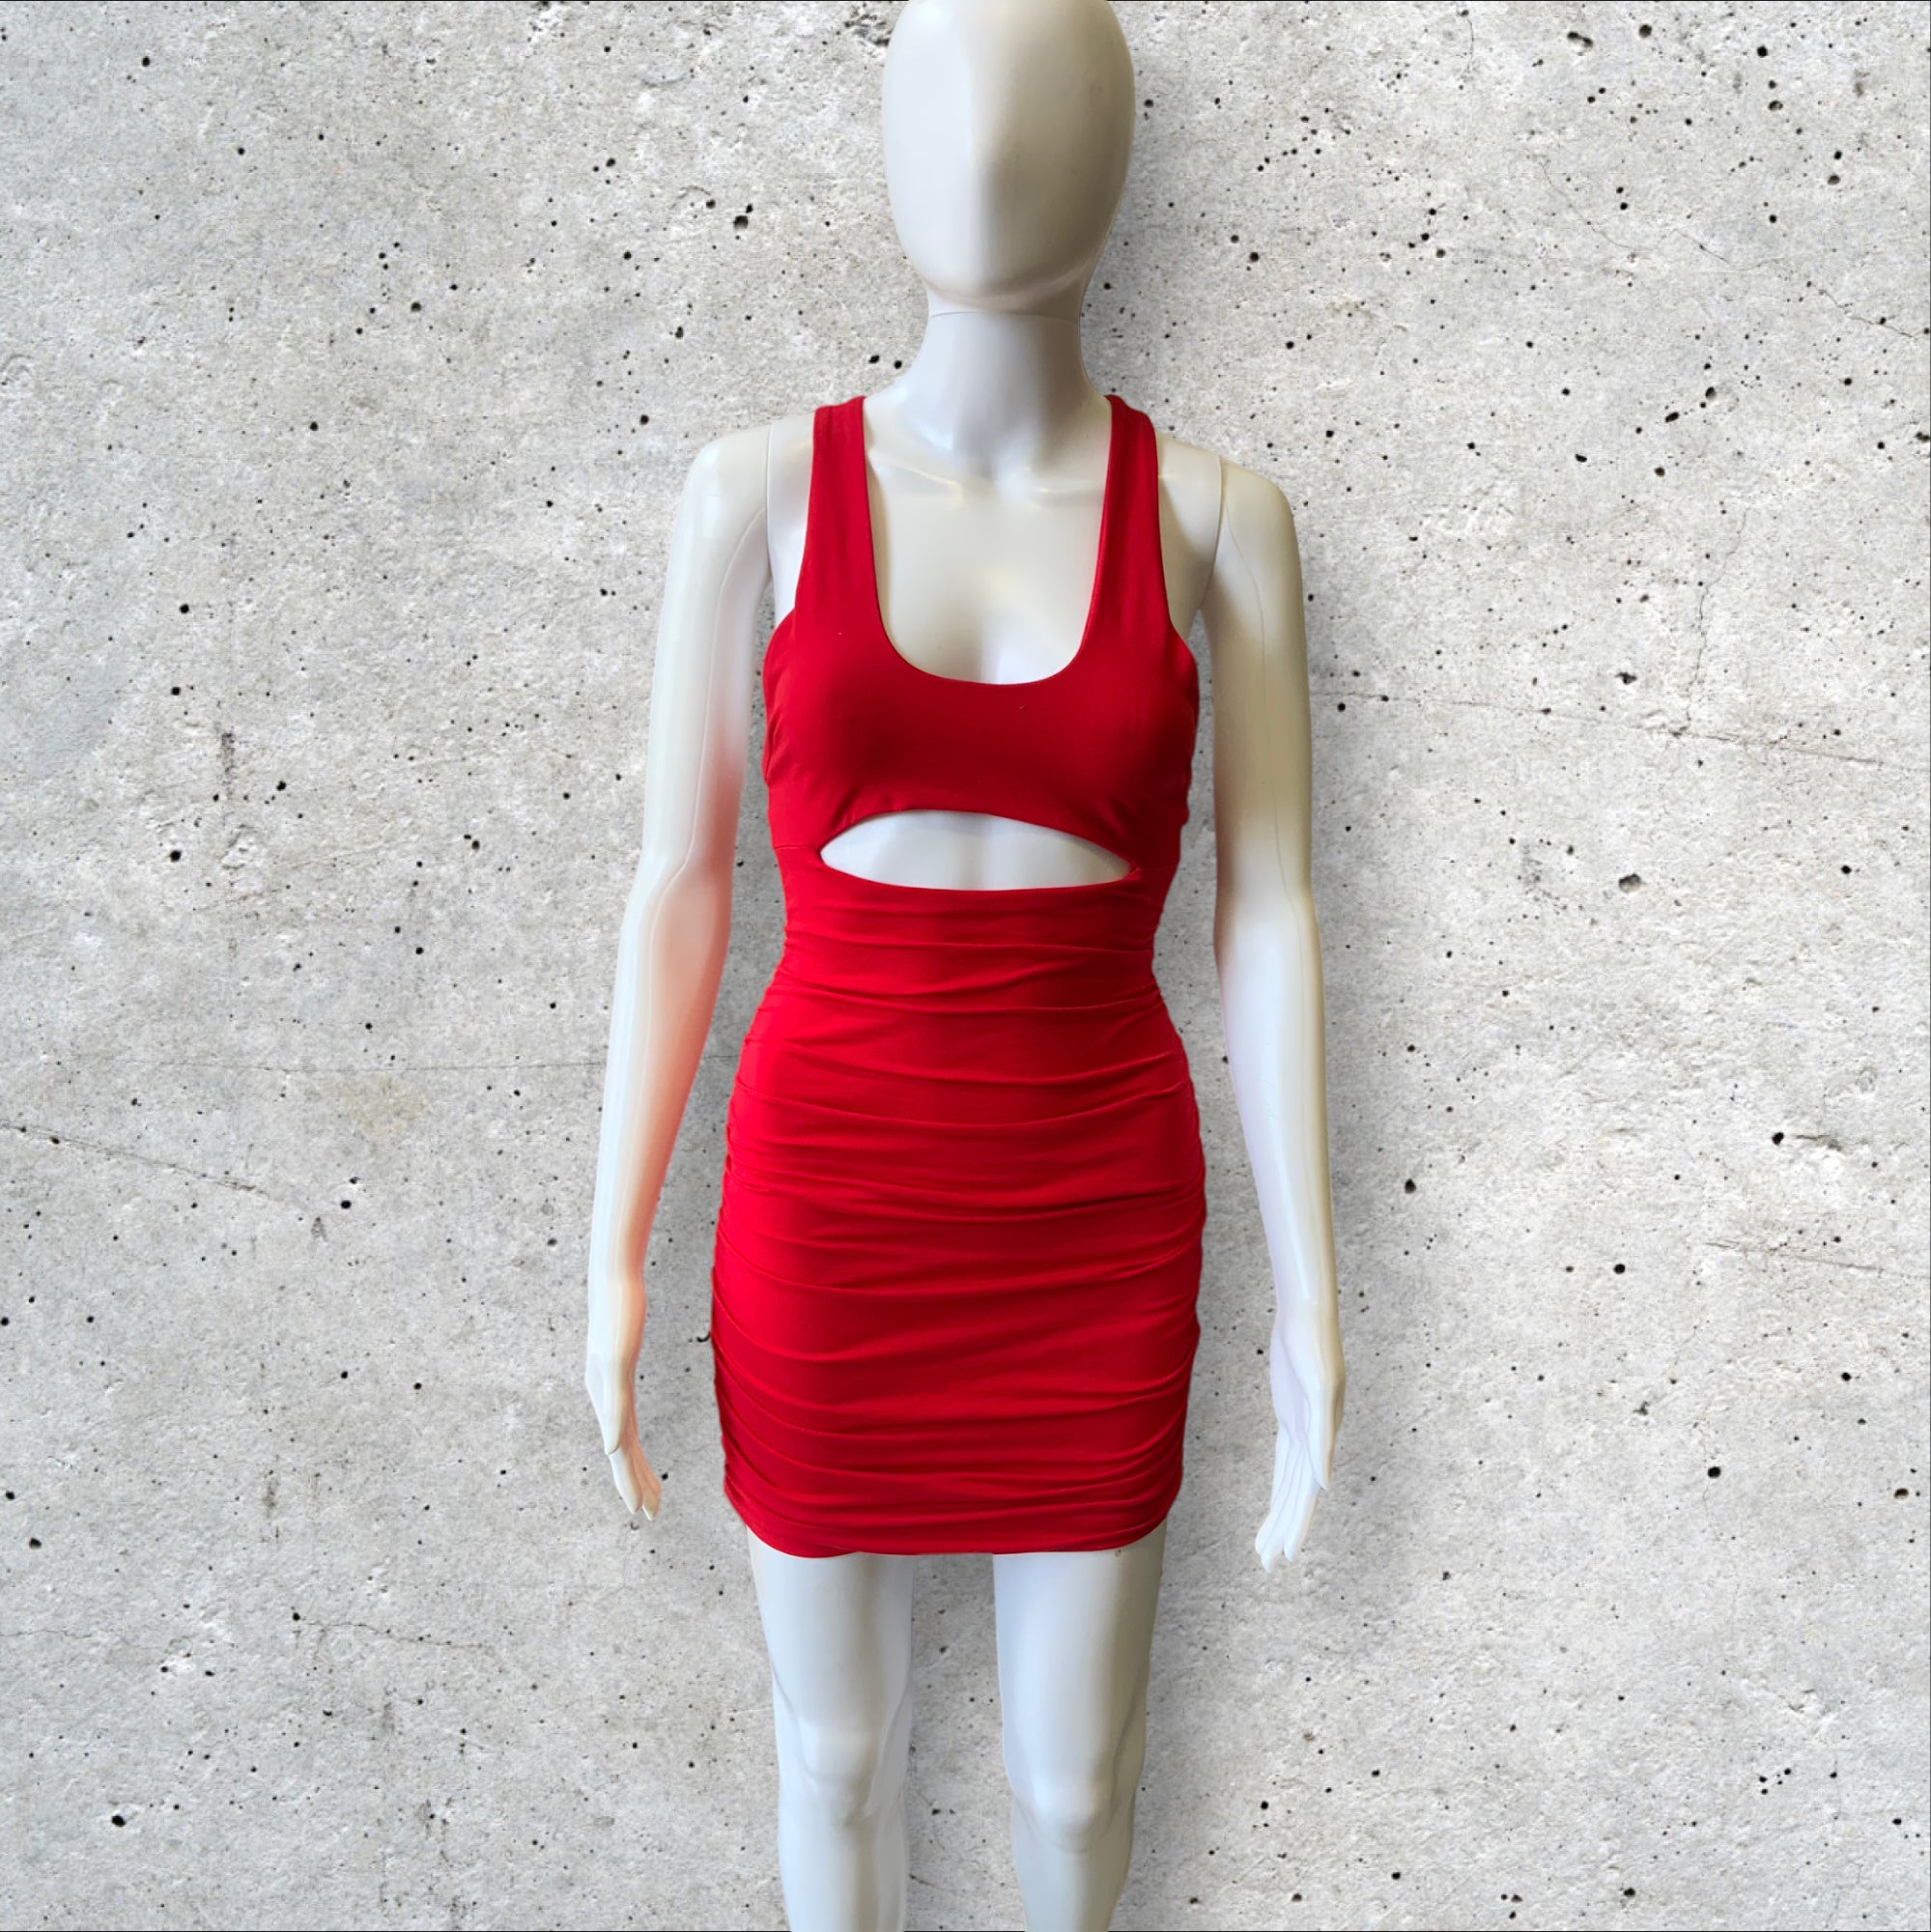 TIGER MIST Sexy Red Cut Out Bodycon Mini Club Dress - Size S